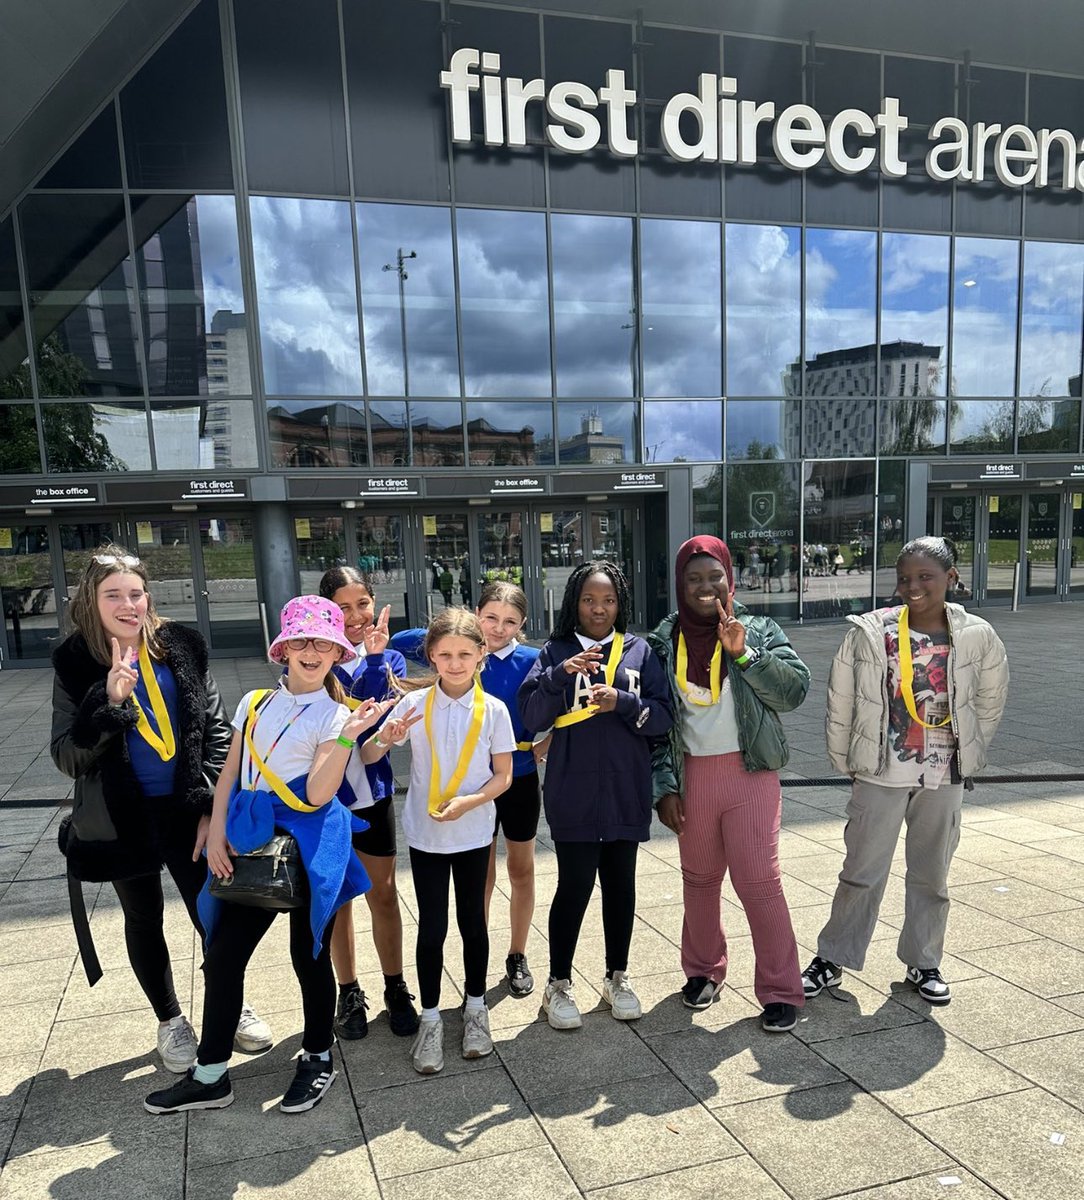 We were tired today, but it was worth it. THERE ARE ROCKSTARS IN YEAR 6 #leeds #firstdirectarena #music #mot #primarymusic @TTRockStars